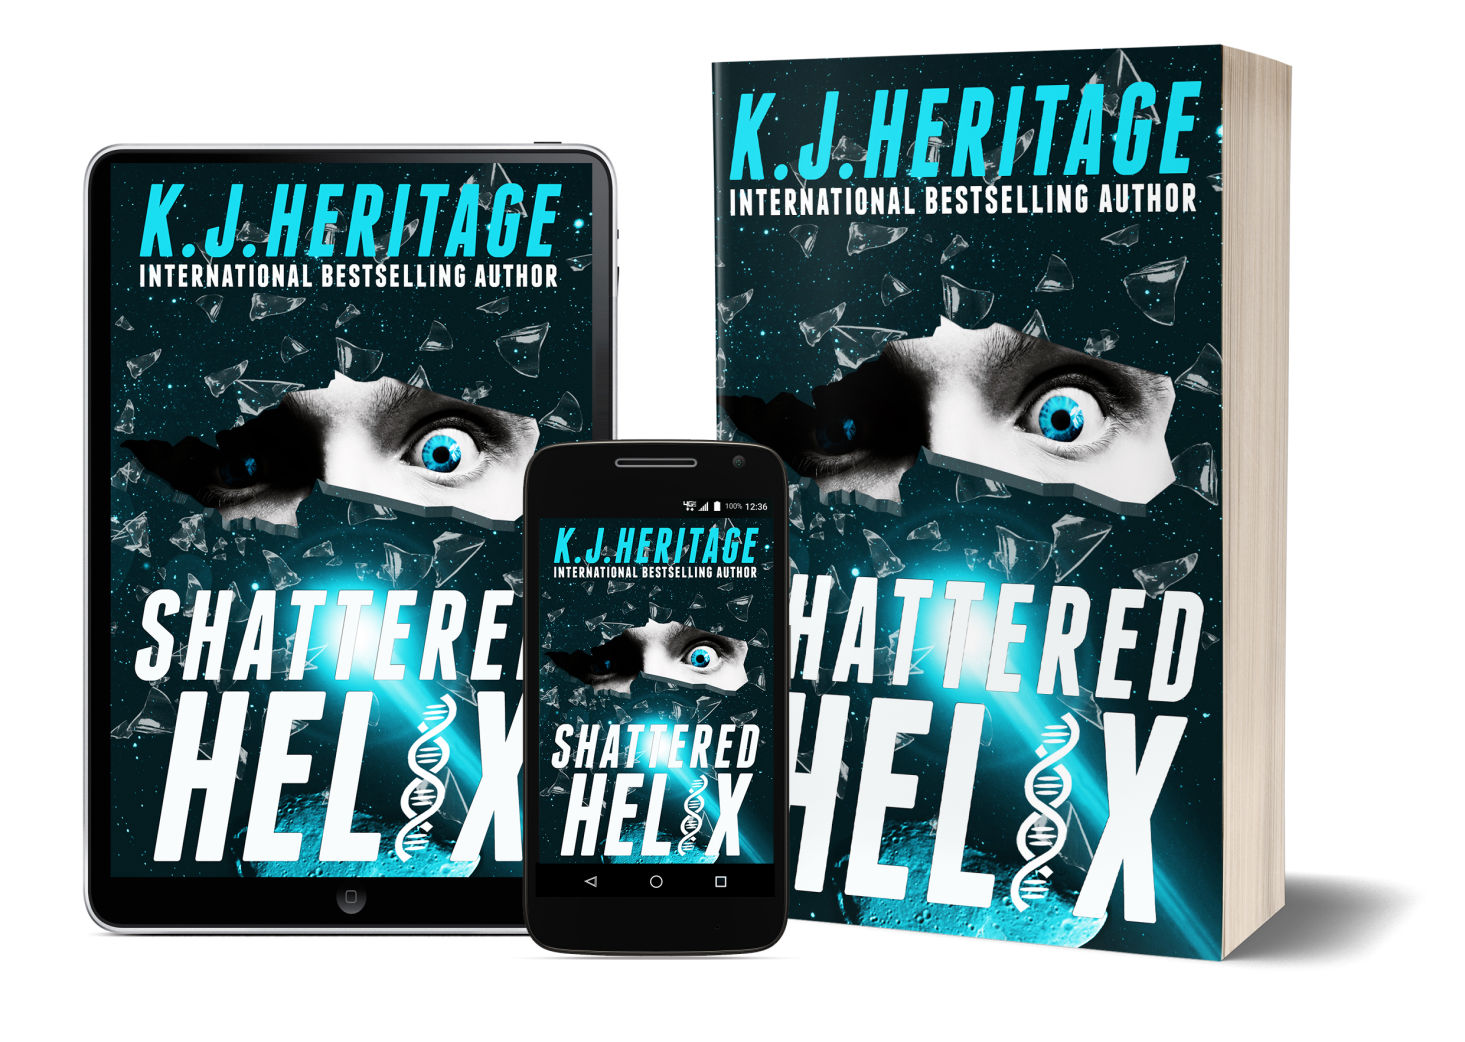 Shattered Helix by K.J.Heritage